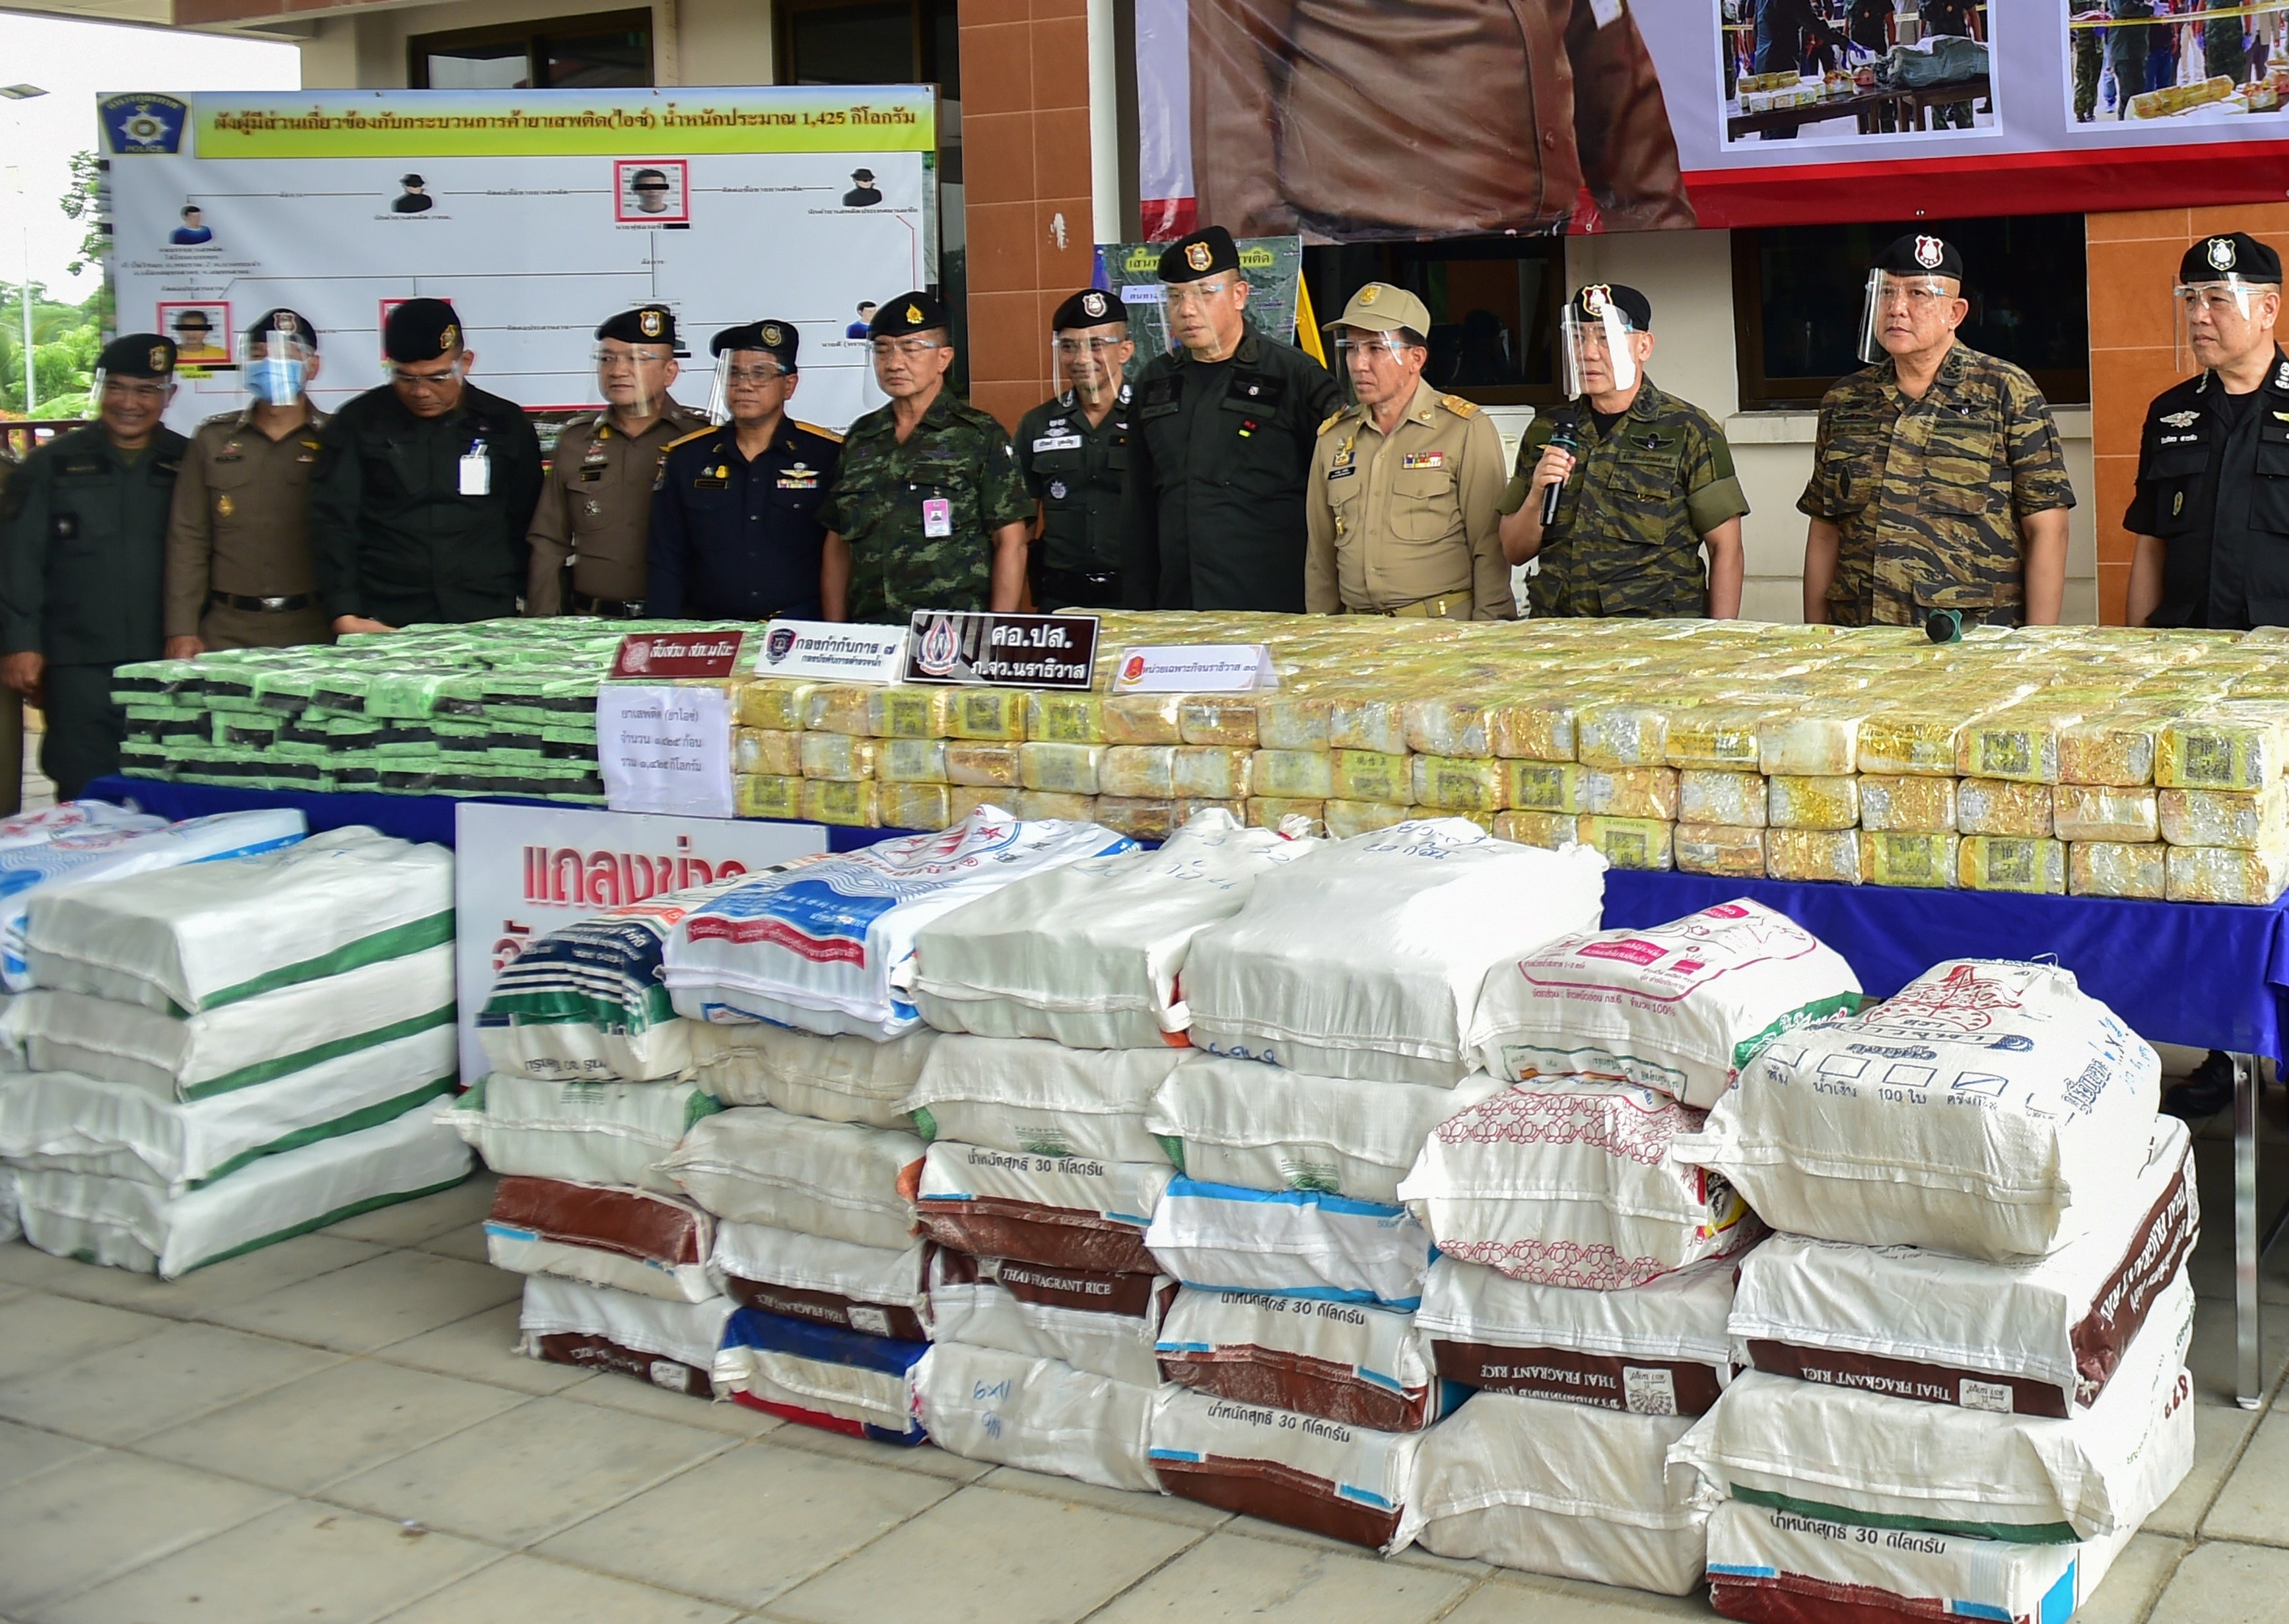 On 12 November, the anti-narcotics agency of the country said it found 11.5 tonnes of ketamine worth $1 billion